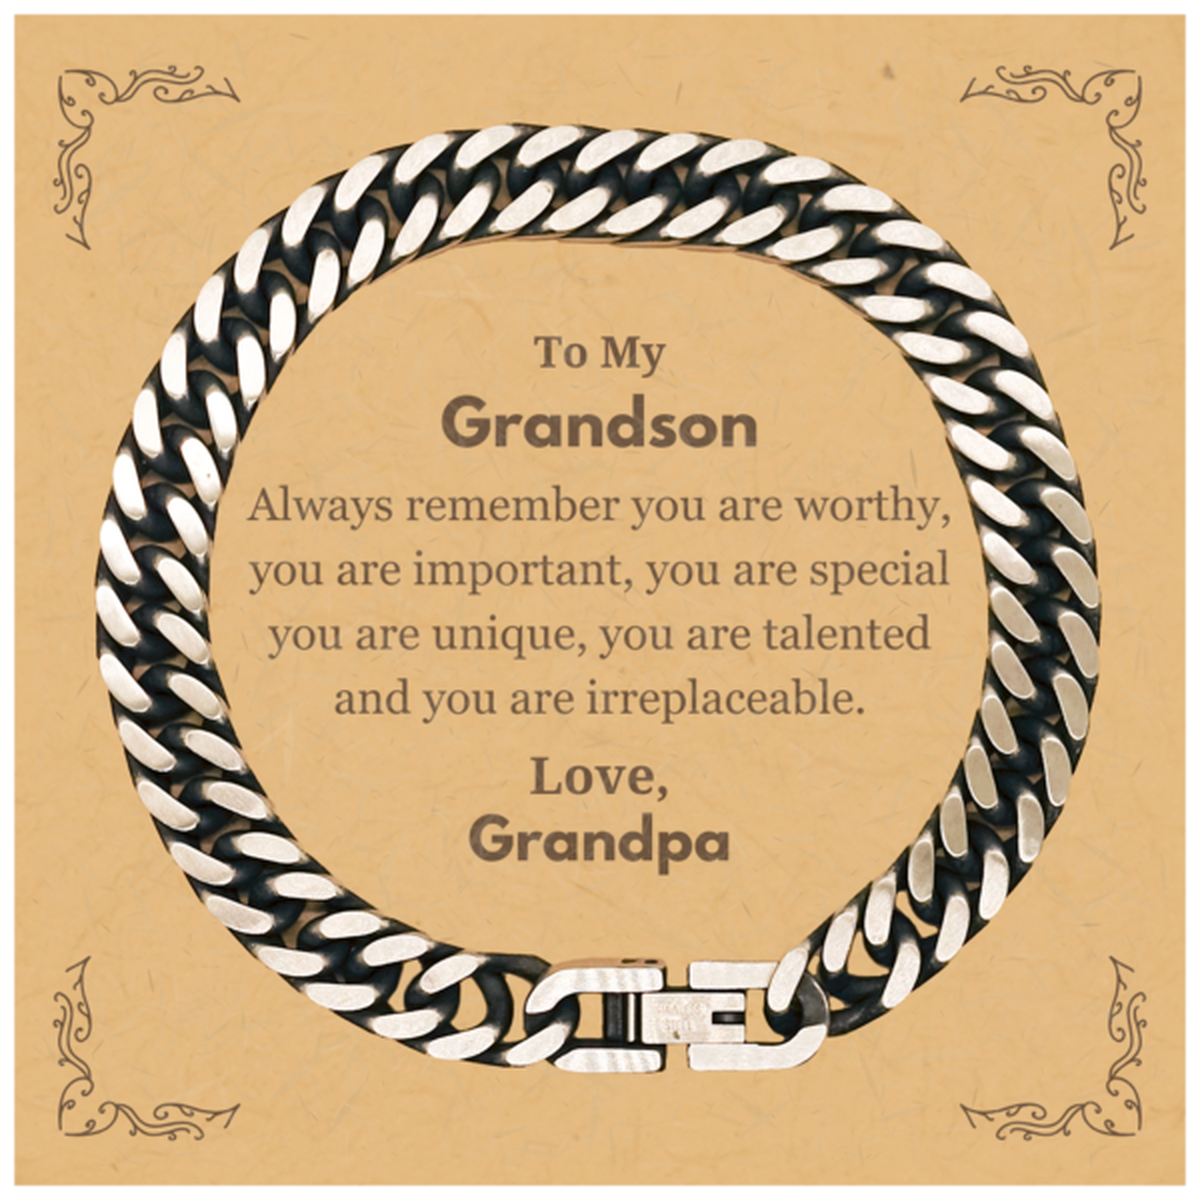 Grandson Birthday Gifts from Grandpa, Inspirational Cuban Link Chain Bracelet for Grandson Christmas Graduation Gifts for Grandson Always remember you are worthy, you are important. Love, Grandpa